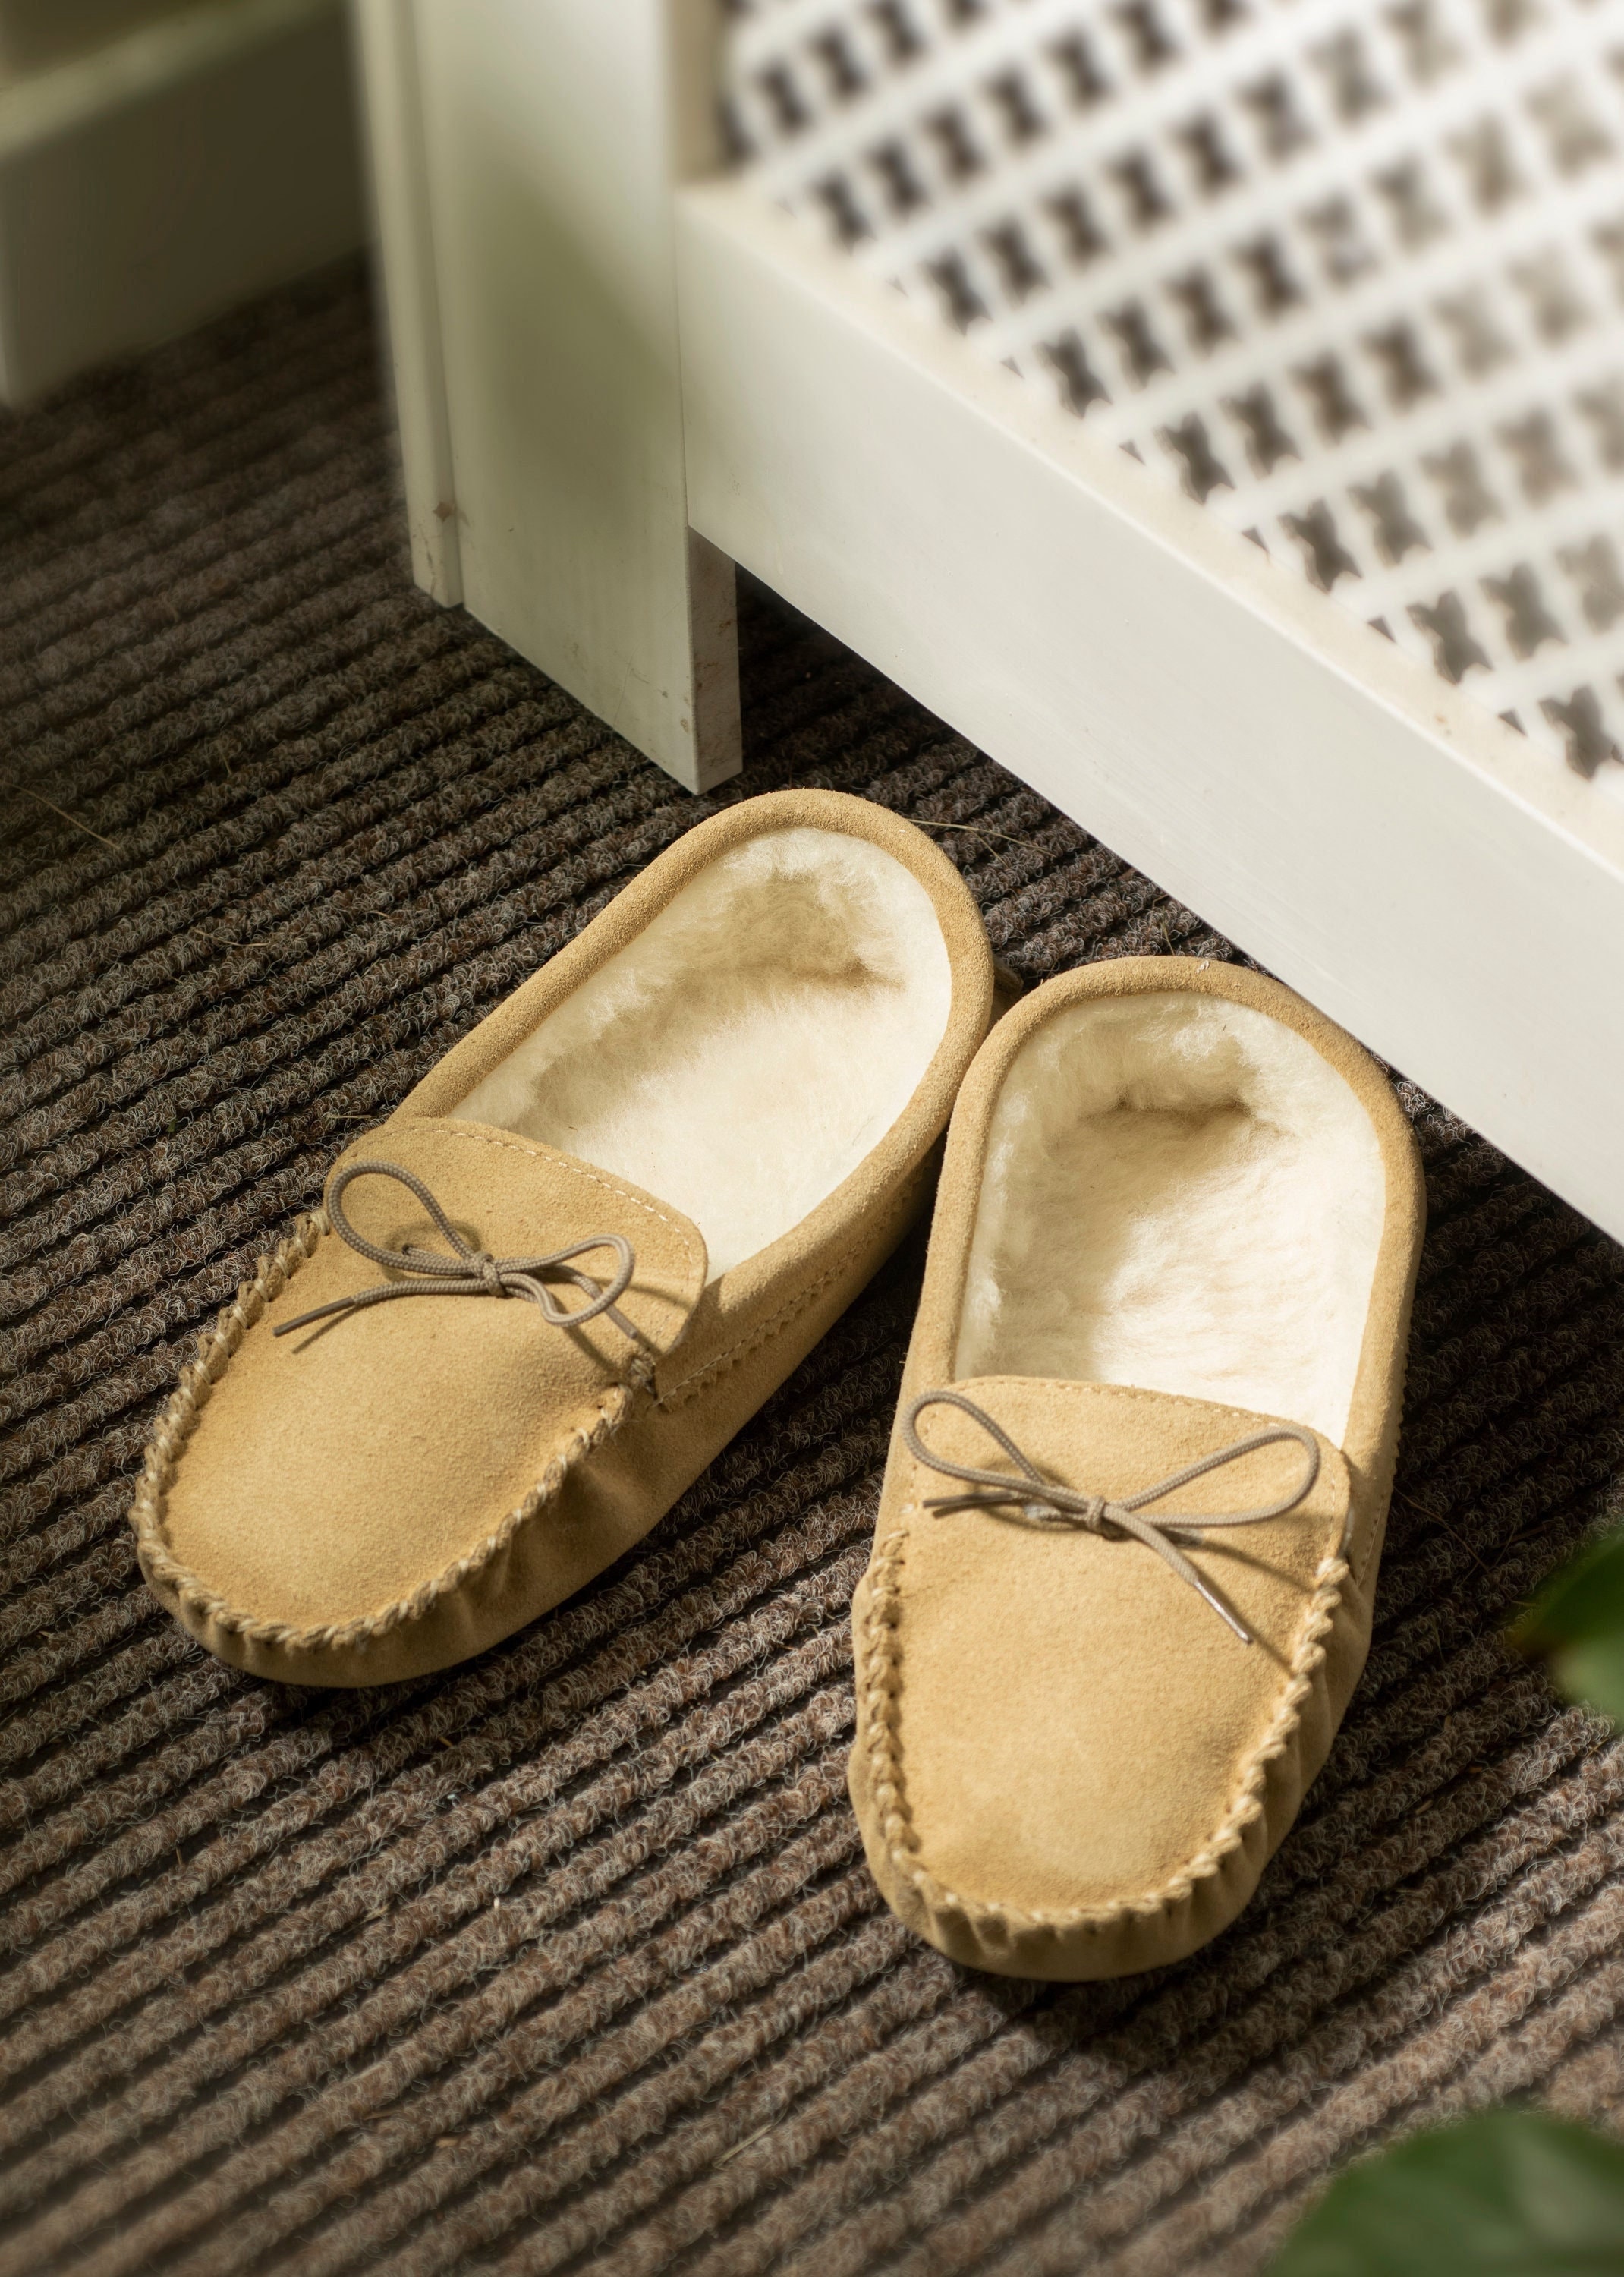 Men's Wool Moccasin Slippers Suede Leather -